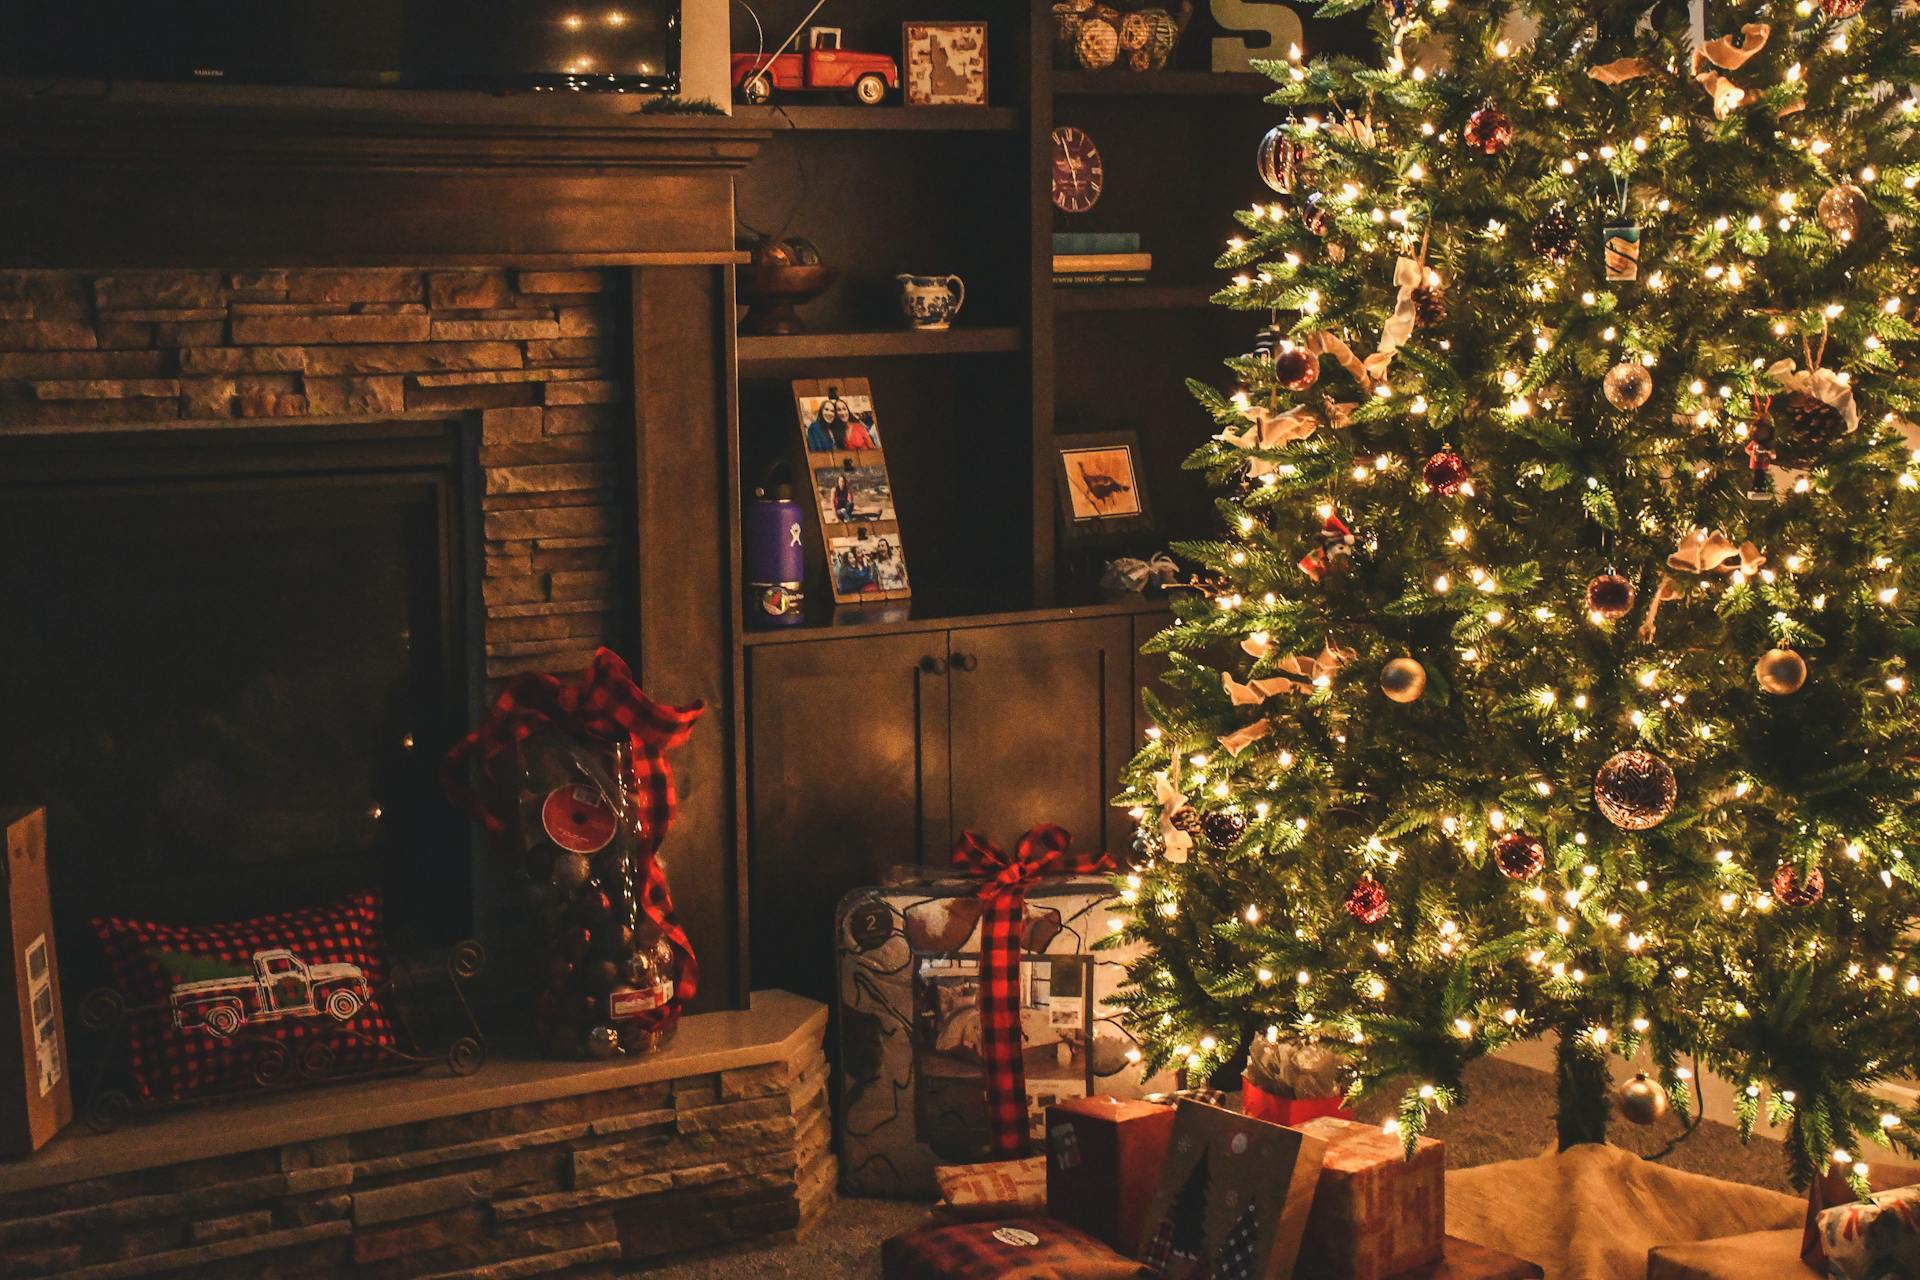 A Christmas tree placed in a living room | Source: Pexels